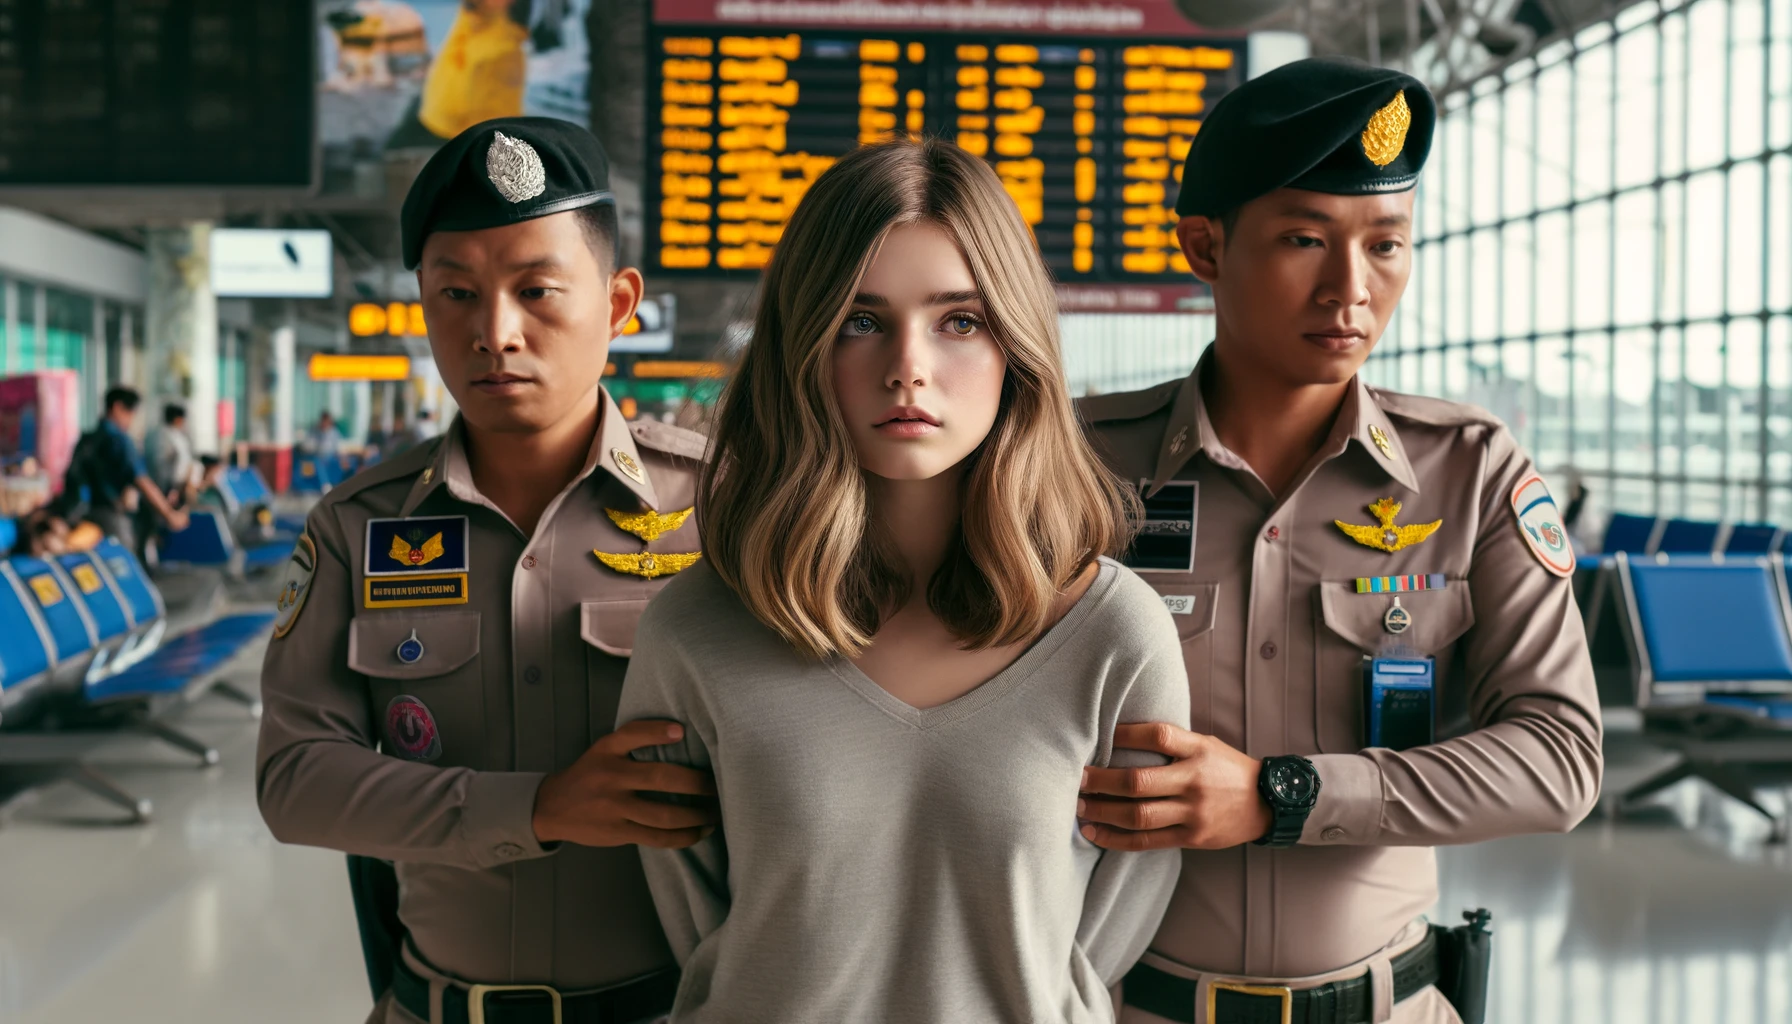 girl being arrested in thailand